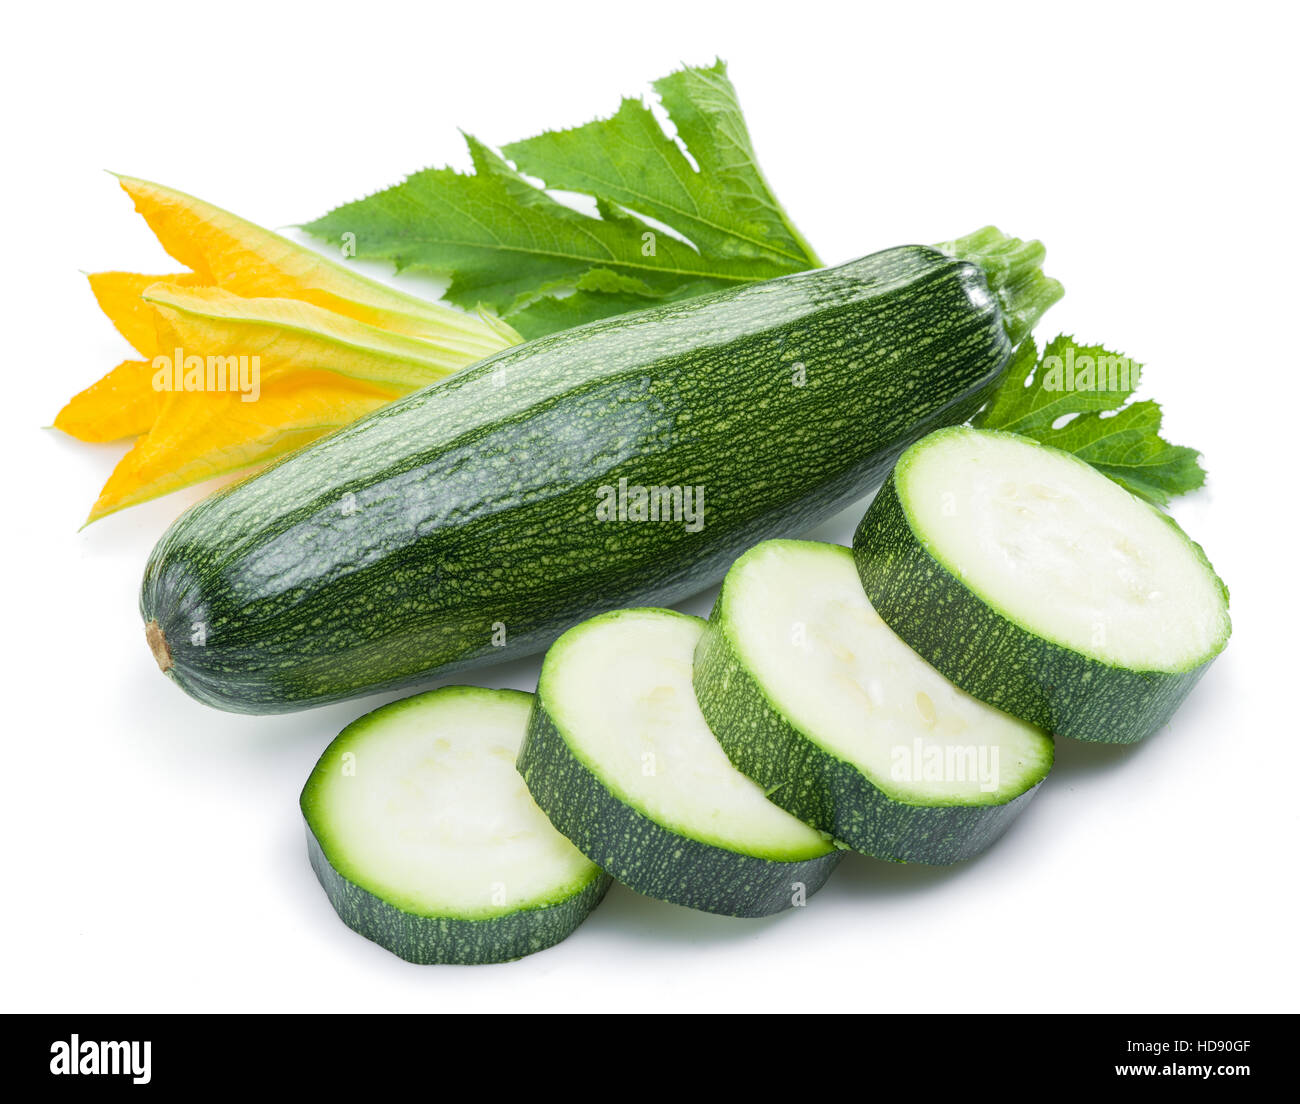 Zucchini with slices and flower on a white background. Stock Photo